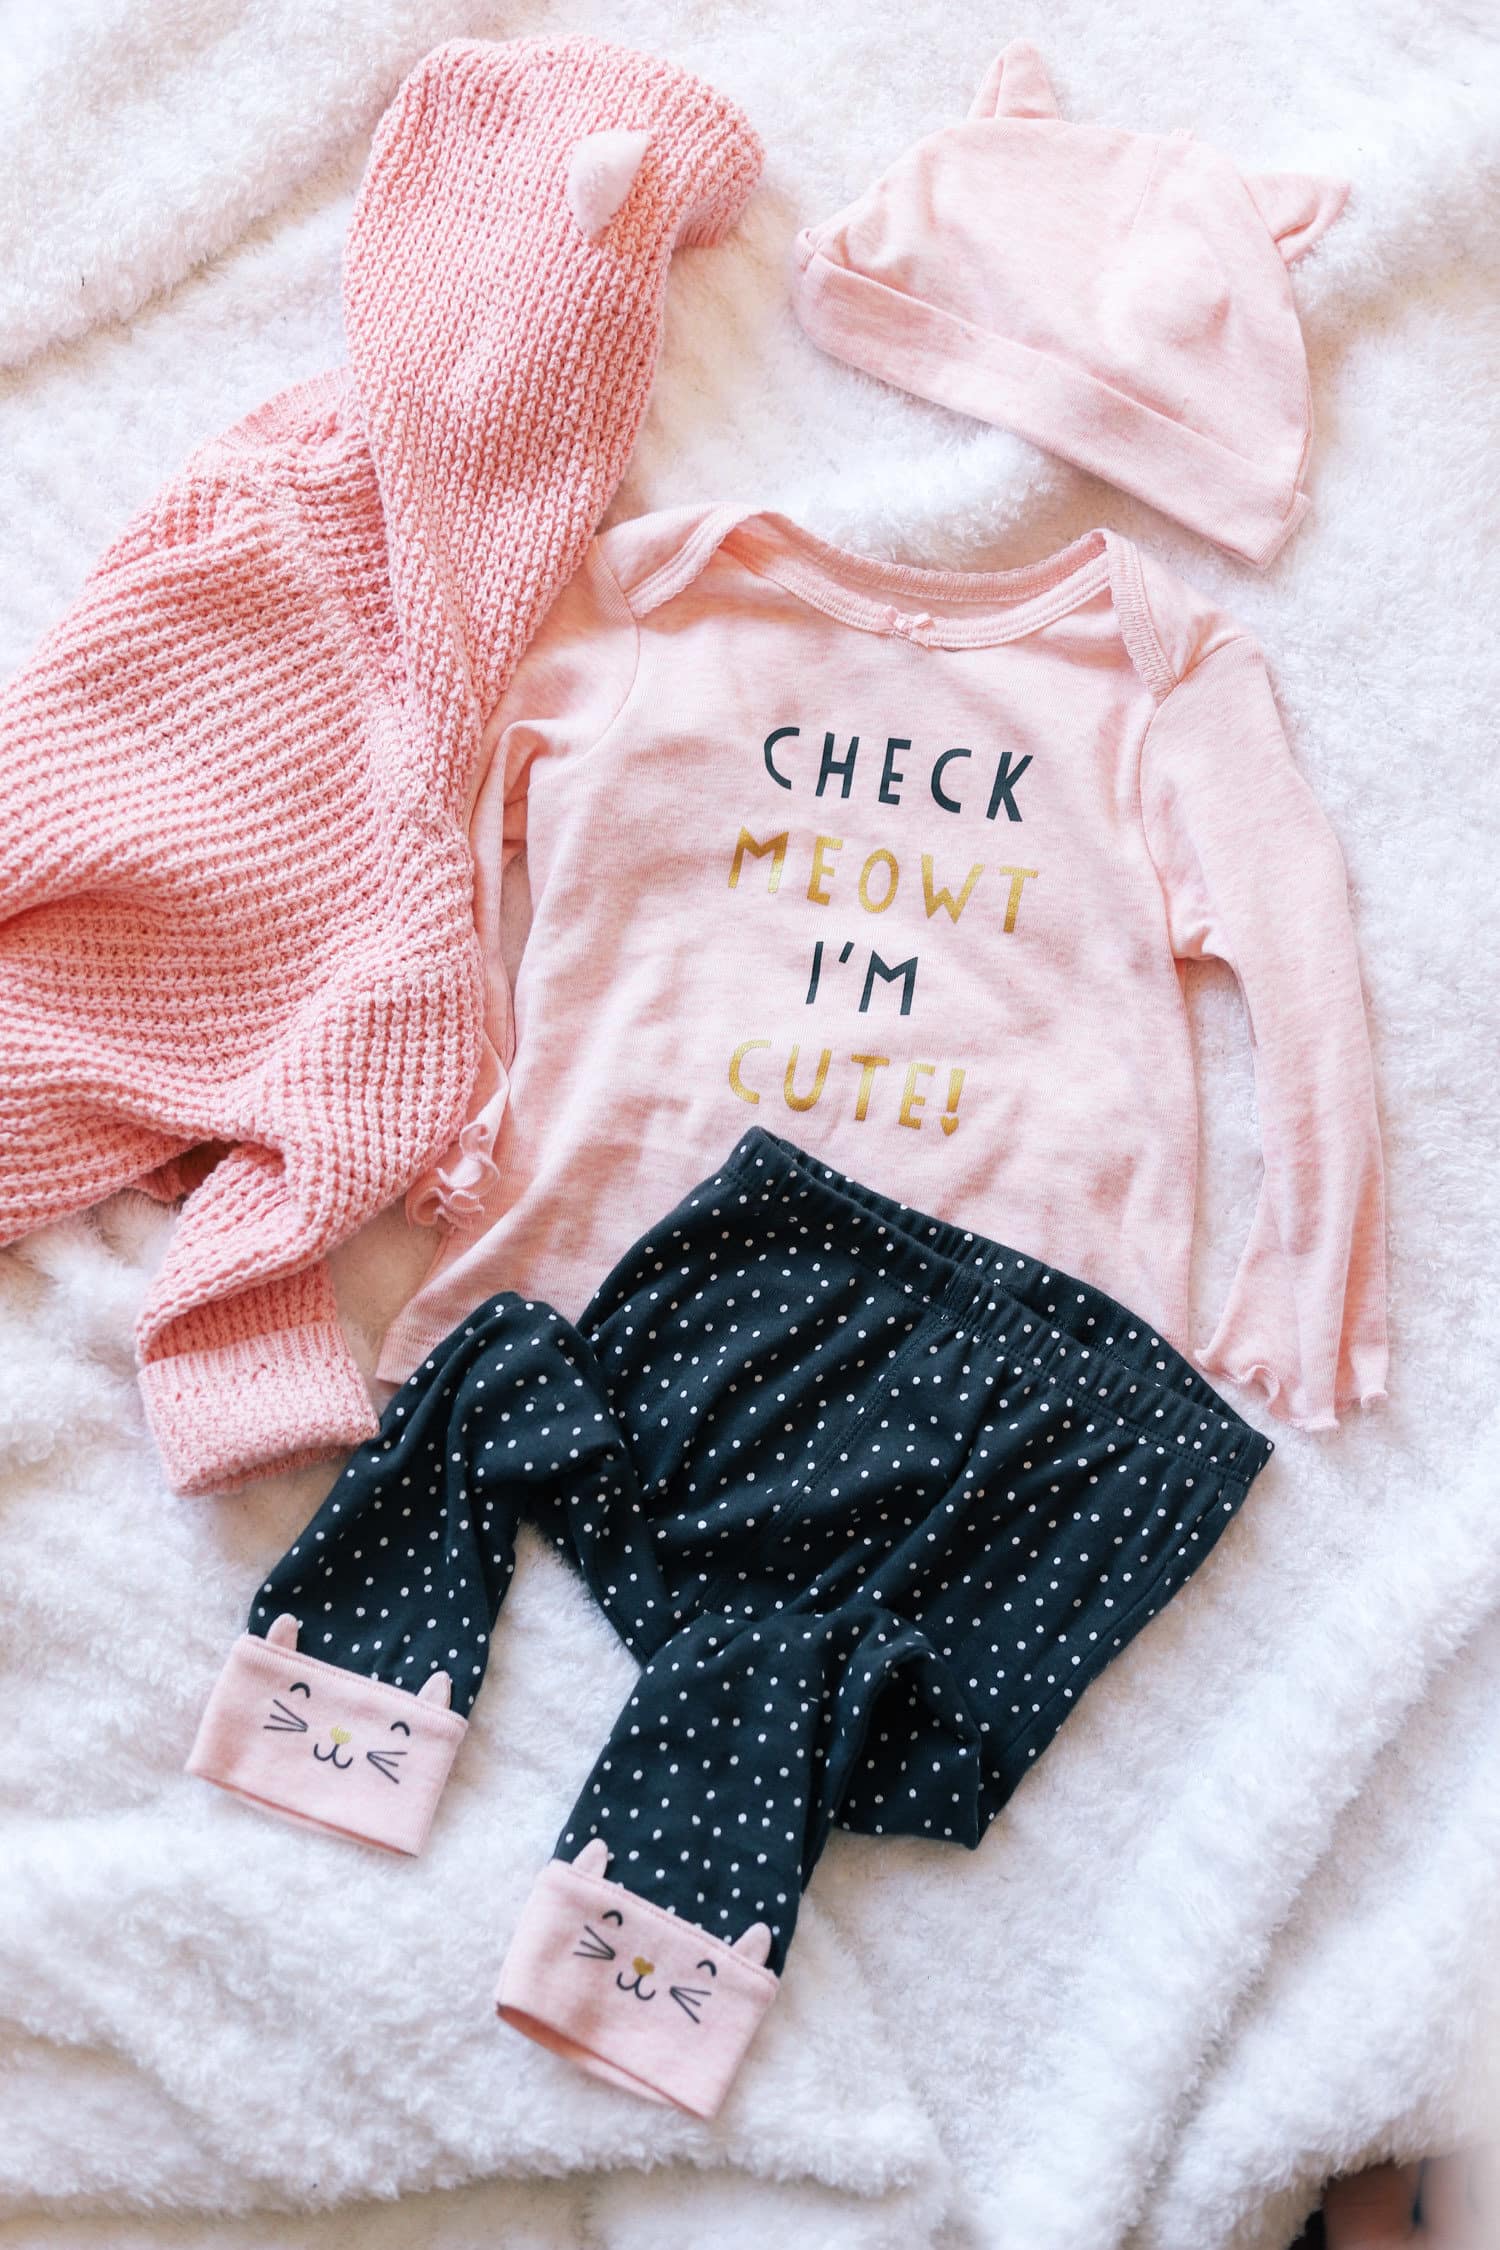 cute baby girl outfits cheap